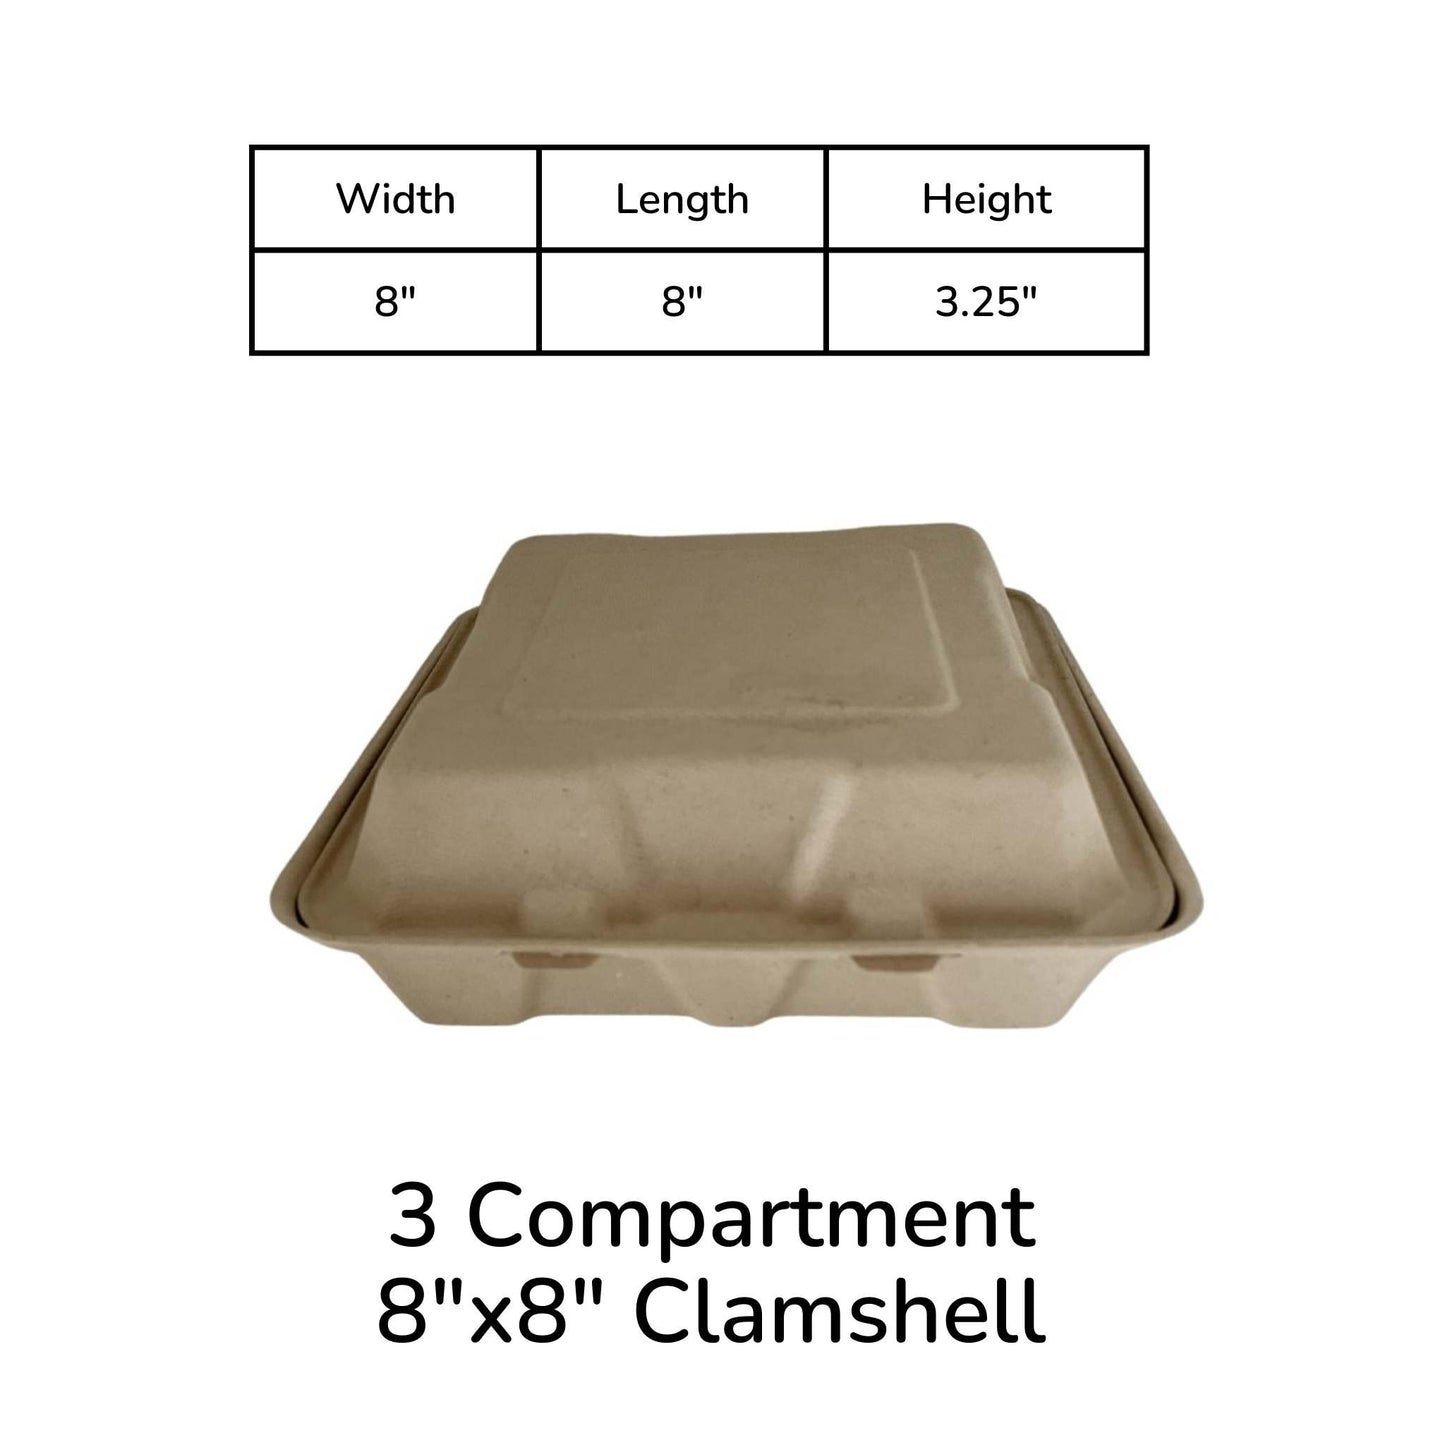 Clamshell 3-compartment container 8" x 8"